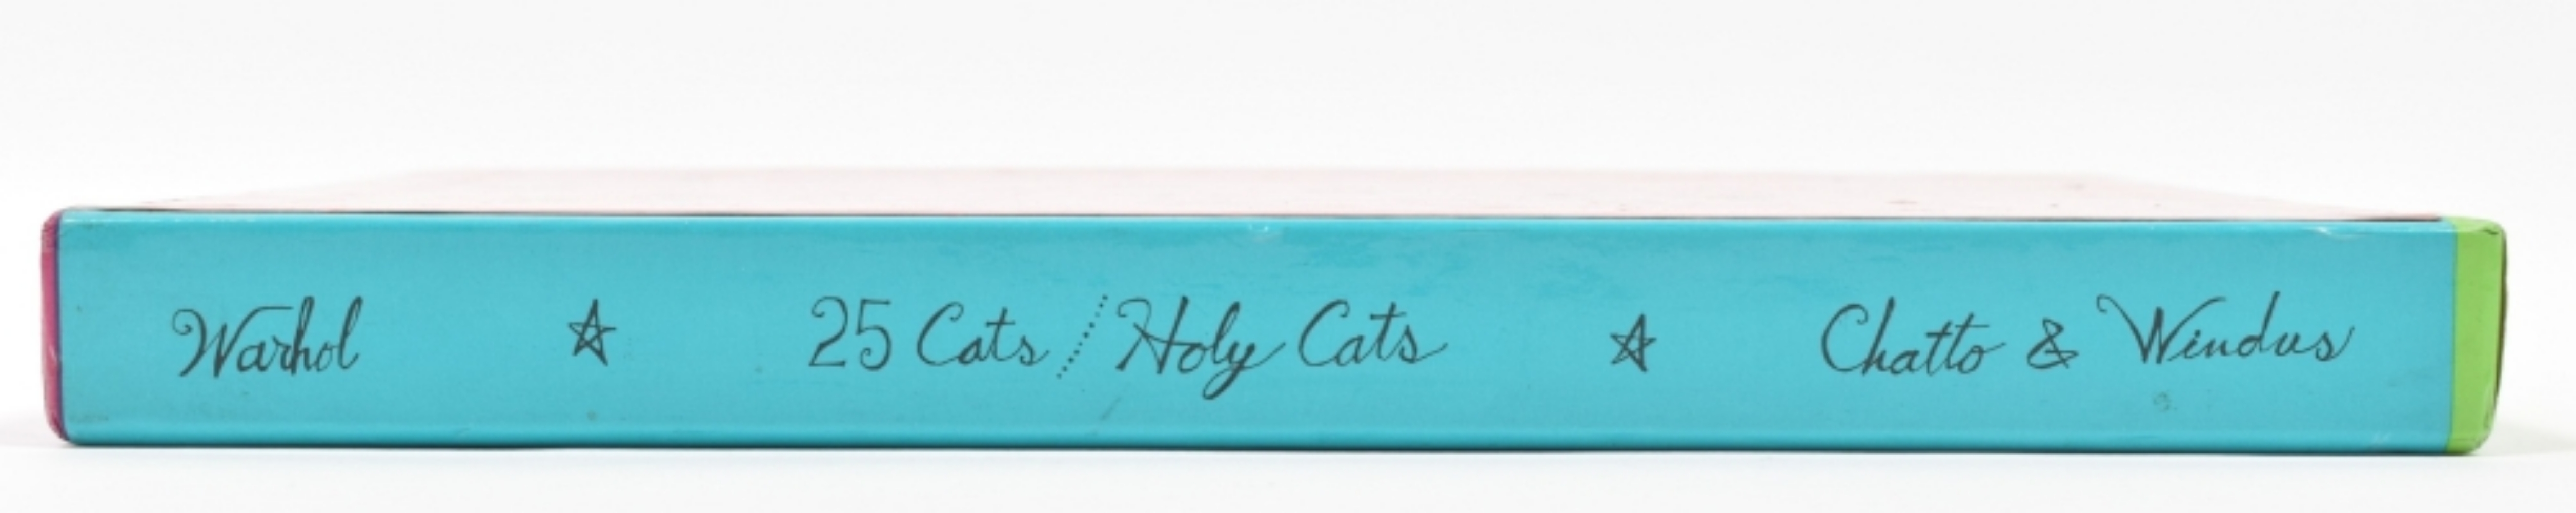 Andy Warhol, 25 Cats Name Sam and One Blue Pussy & Holy Cats by Andy Warhol's Mother - Image 5 of 10